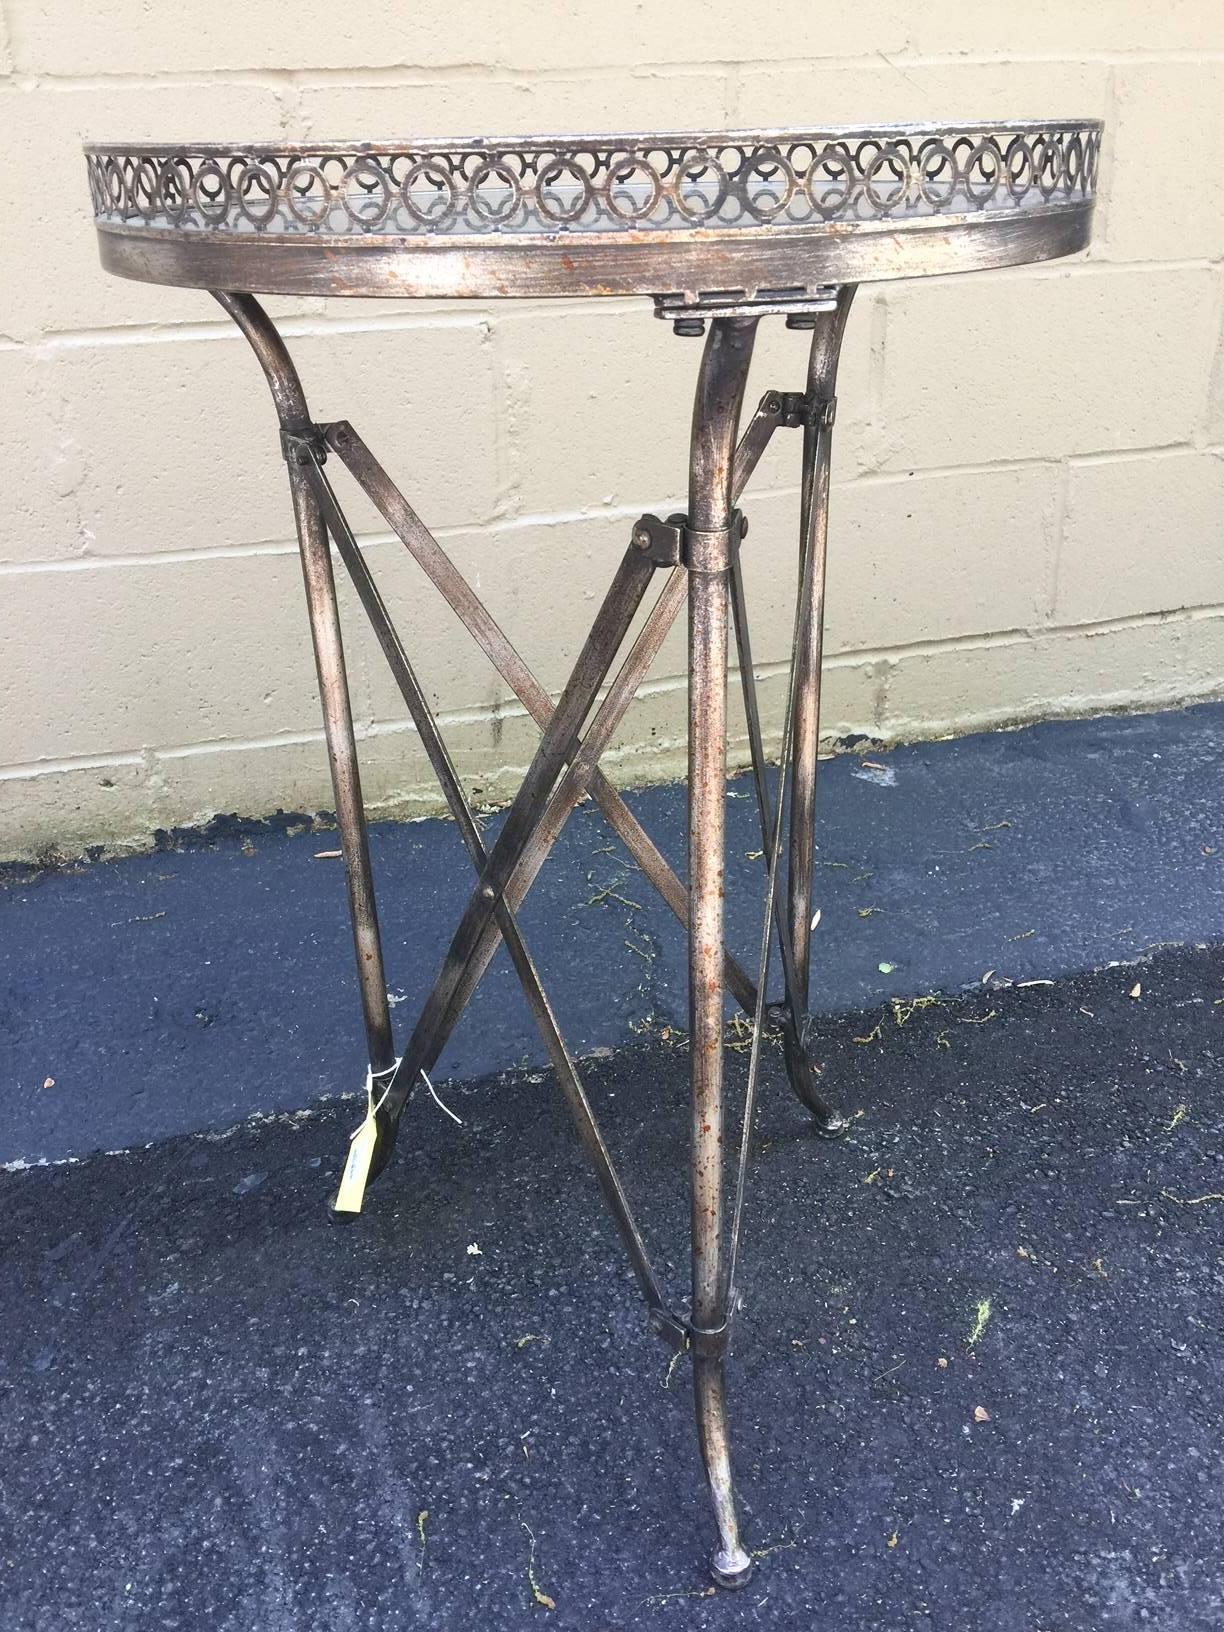 A Napoleon style French guéridon side table from the mid-20th century. We adored this Napoleon-inspired side table the second we saw it. It is made of an iron X-frame, supporting a circular gray marble top. The latter is adorned with an exquisite